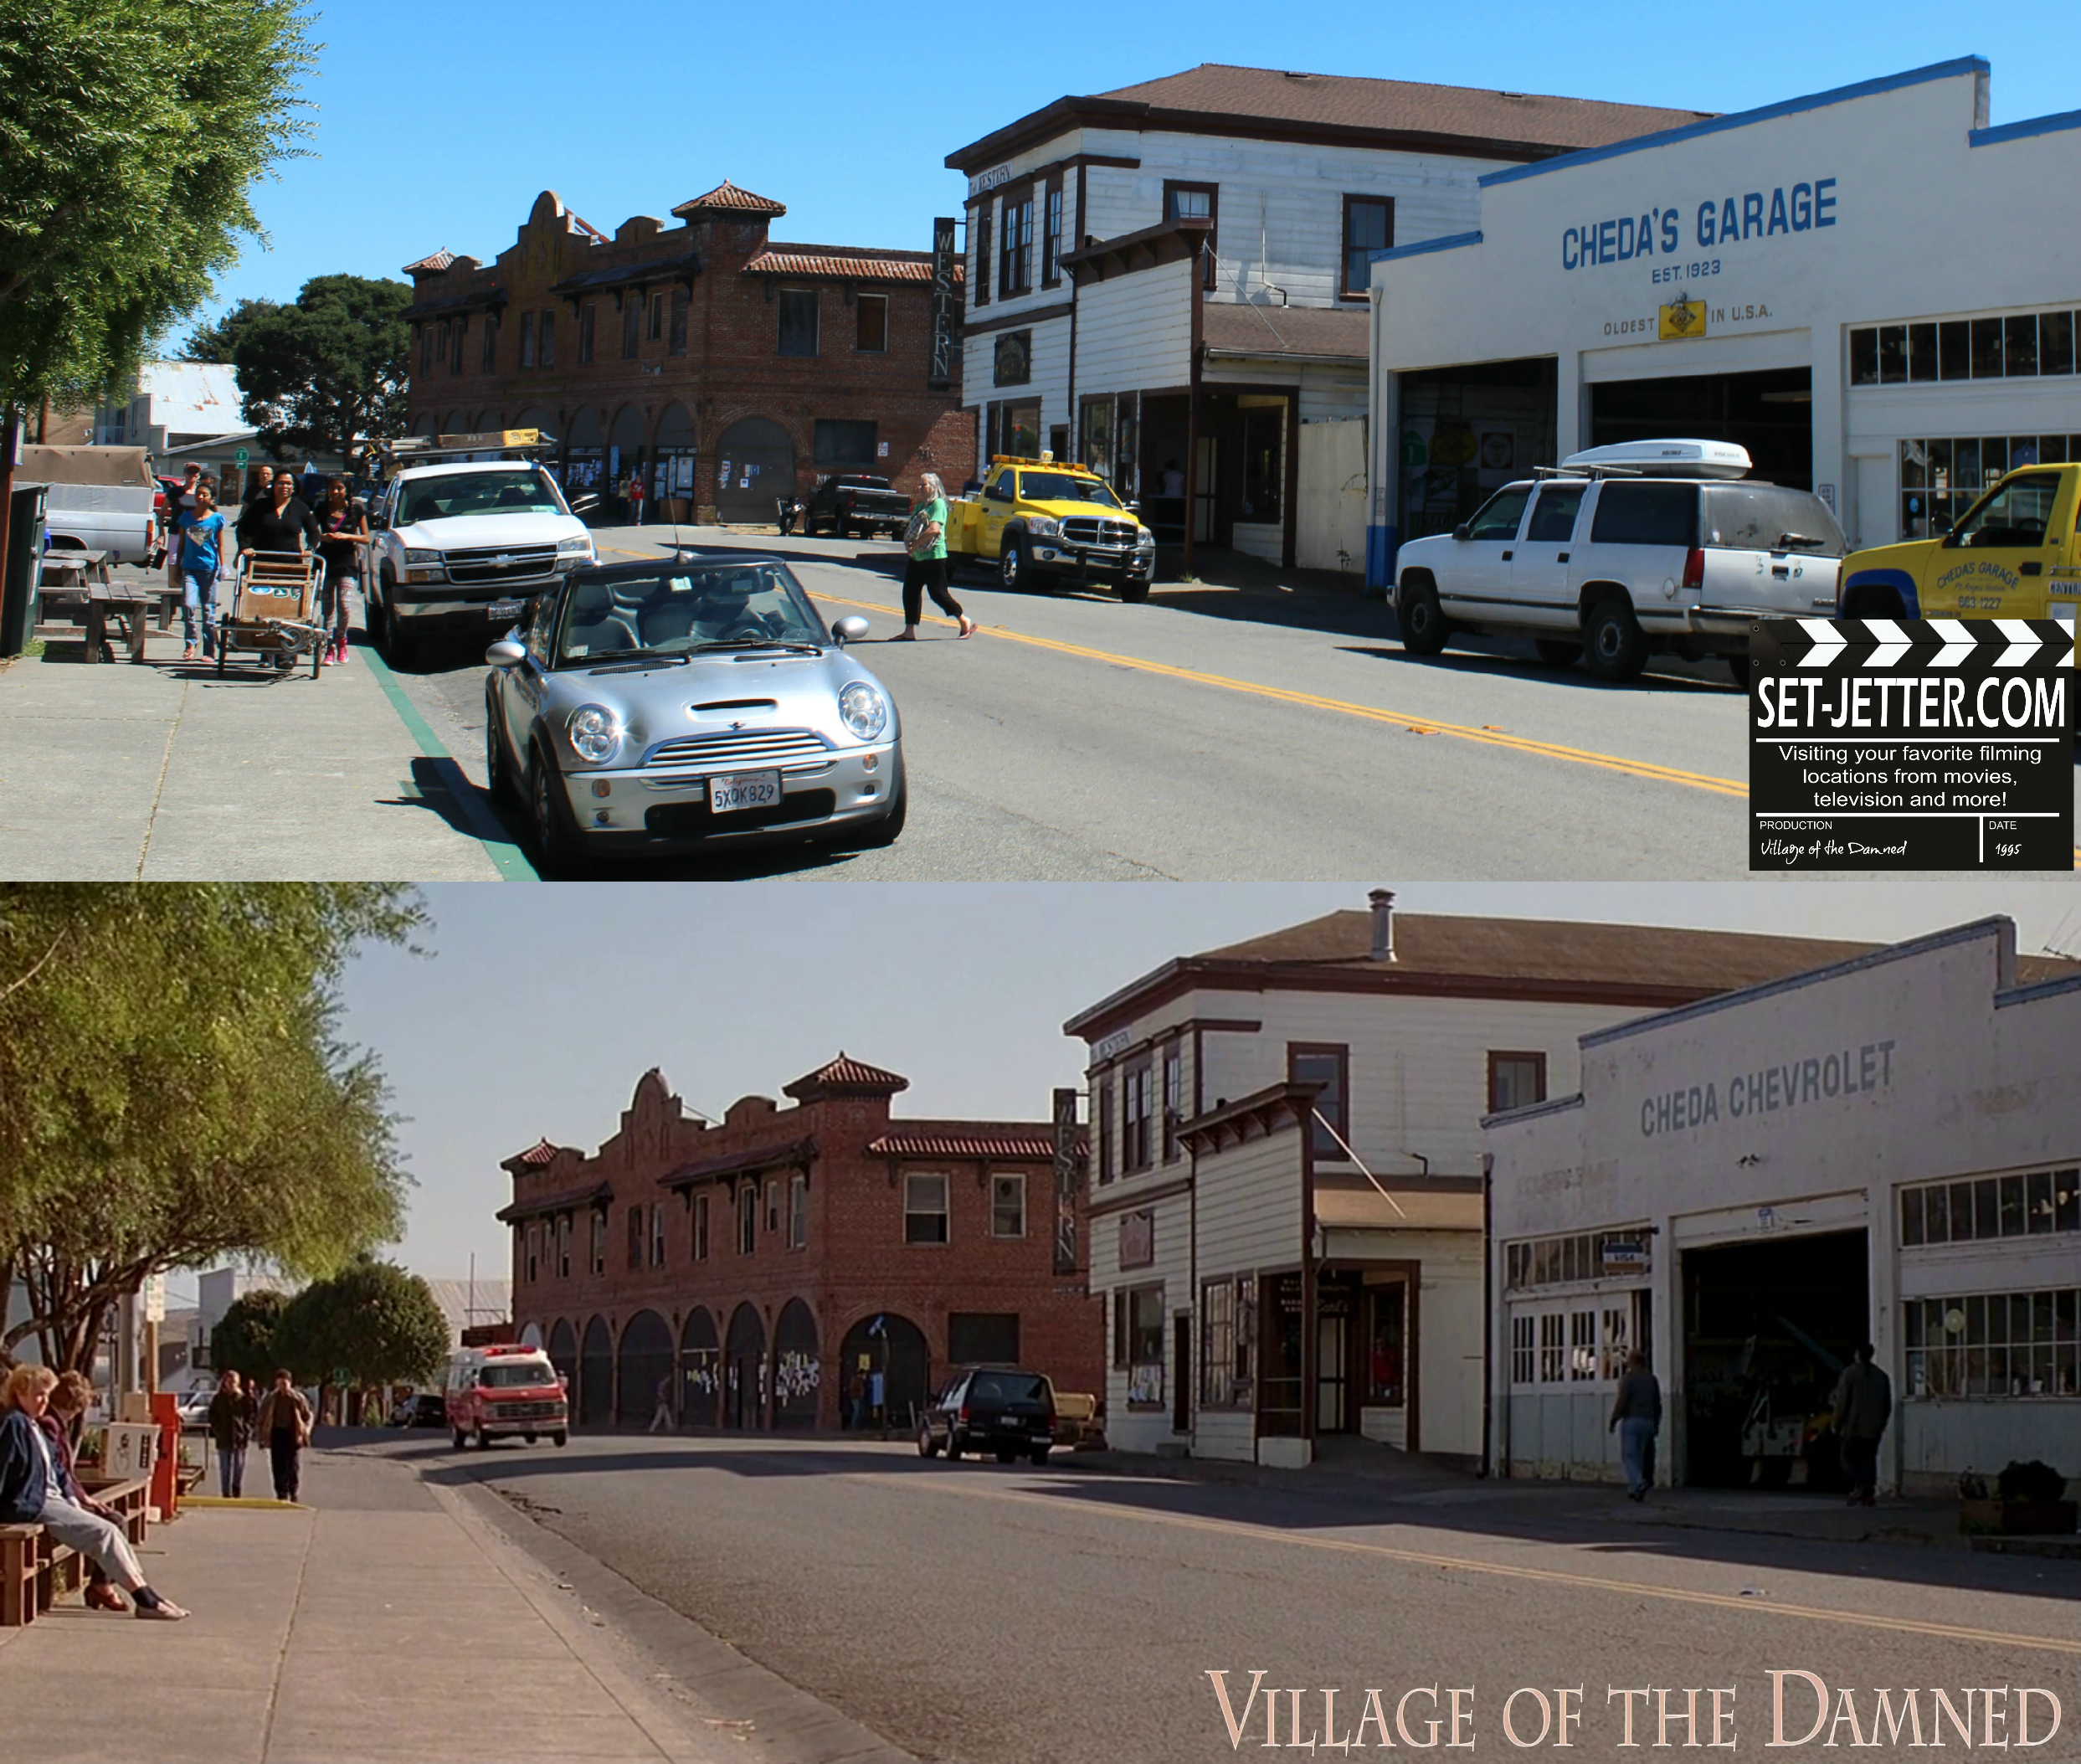 Village of the Damned comparison 207.jpg